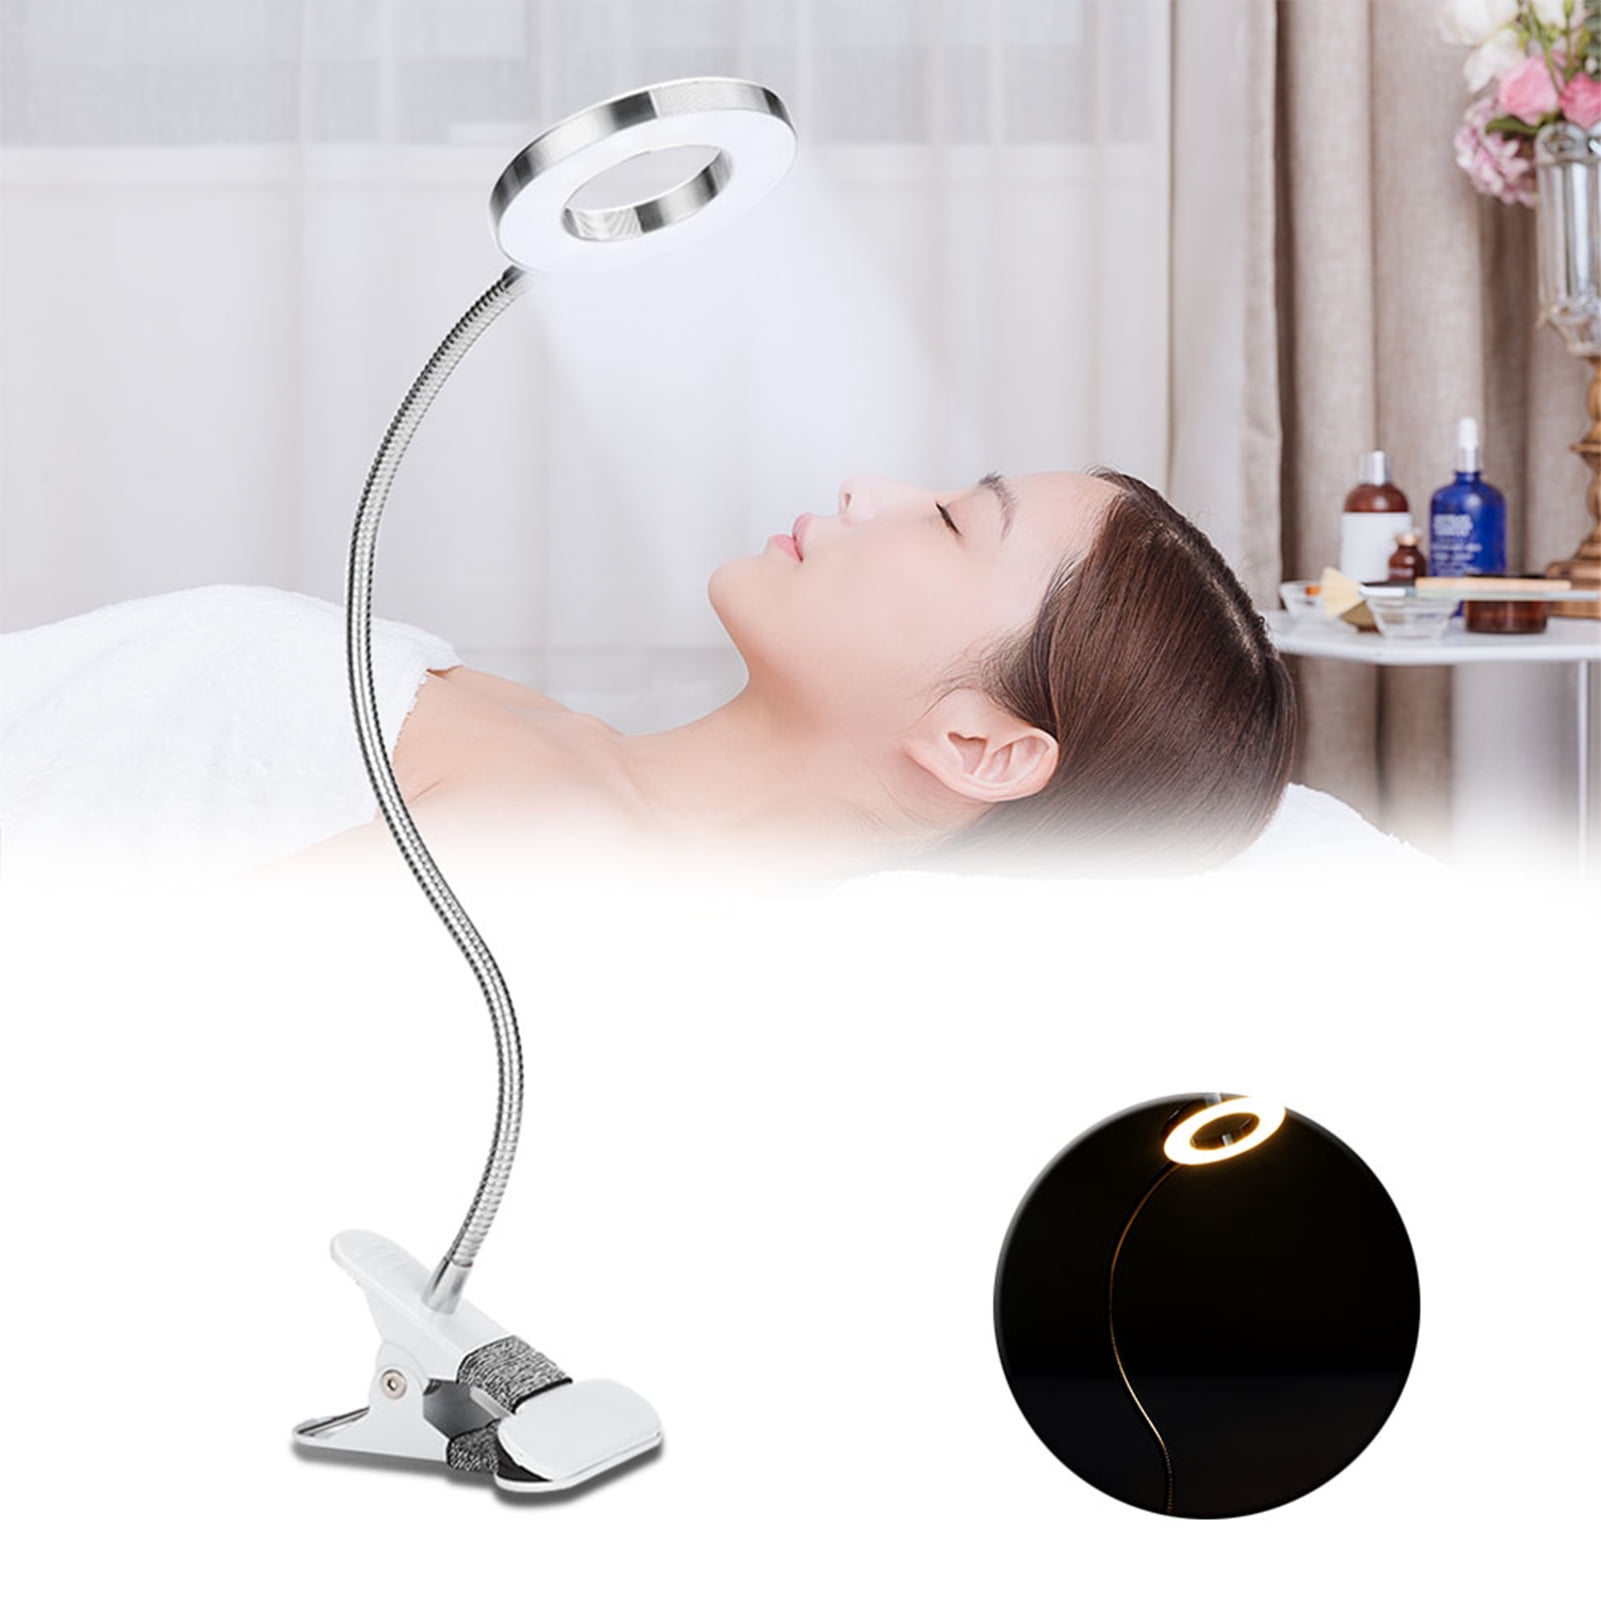 Buy MUMBAI TATTOO LED Clip Light Online at Low Prices in India - Amazon.in